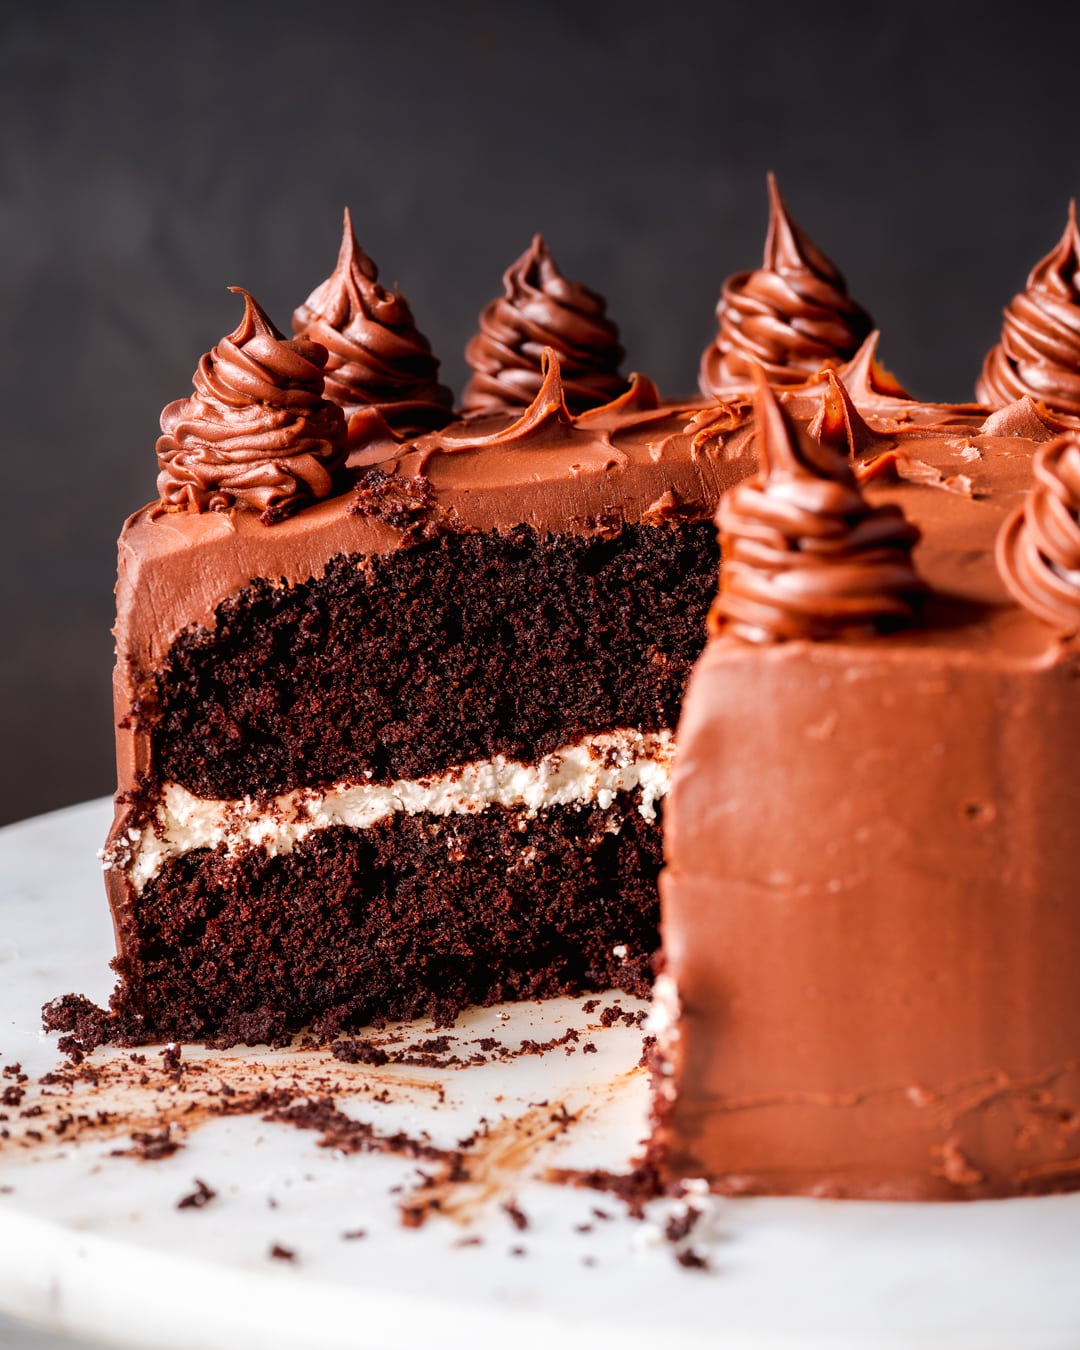 Decadent Vegan Chocolate Cake Recipe: cake with your favorite frosting!